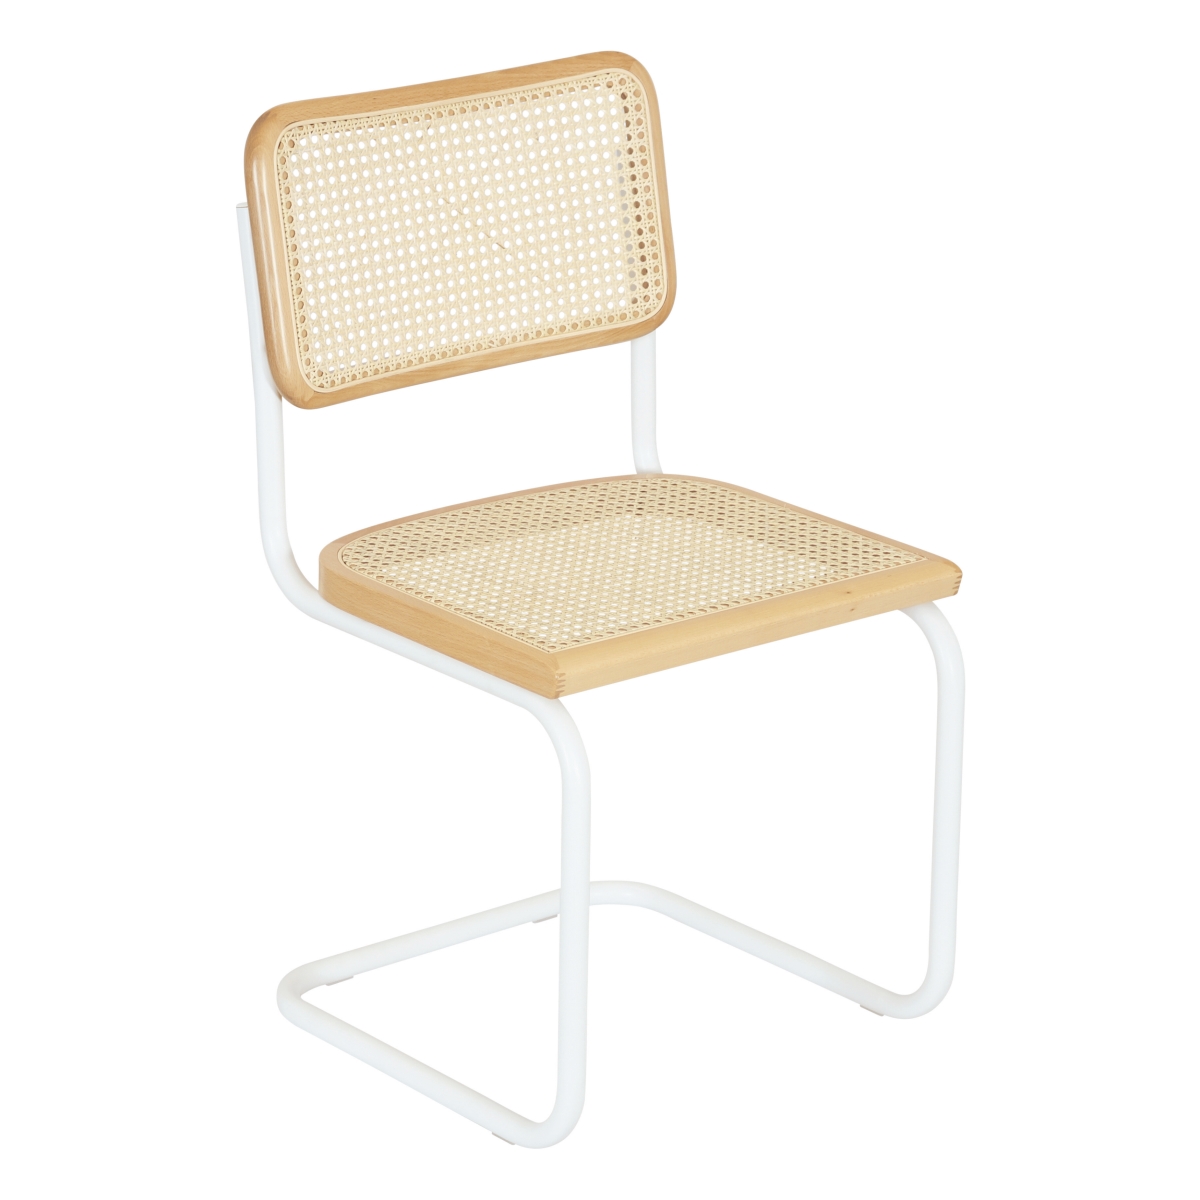 Picture of Breuer Chair Company UNB-BCC-CSCA-SC-WHTF-NTRLW-NTRLC Breuer Chair Company Marcel Breuer B32 Cesca Cane Cantilever Side Chair w/ White Steel Frame Natural Wood & Natural Cane (Made in Italy) by Furnish Theory